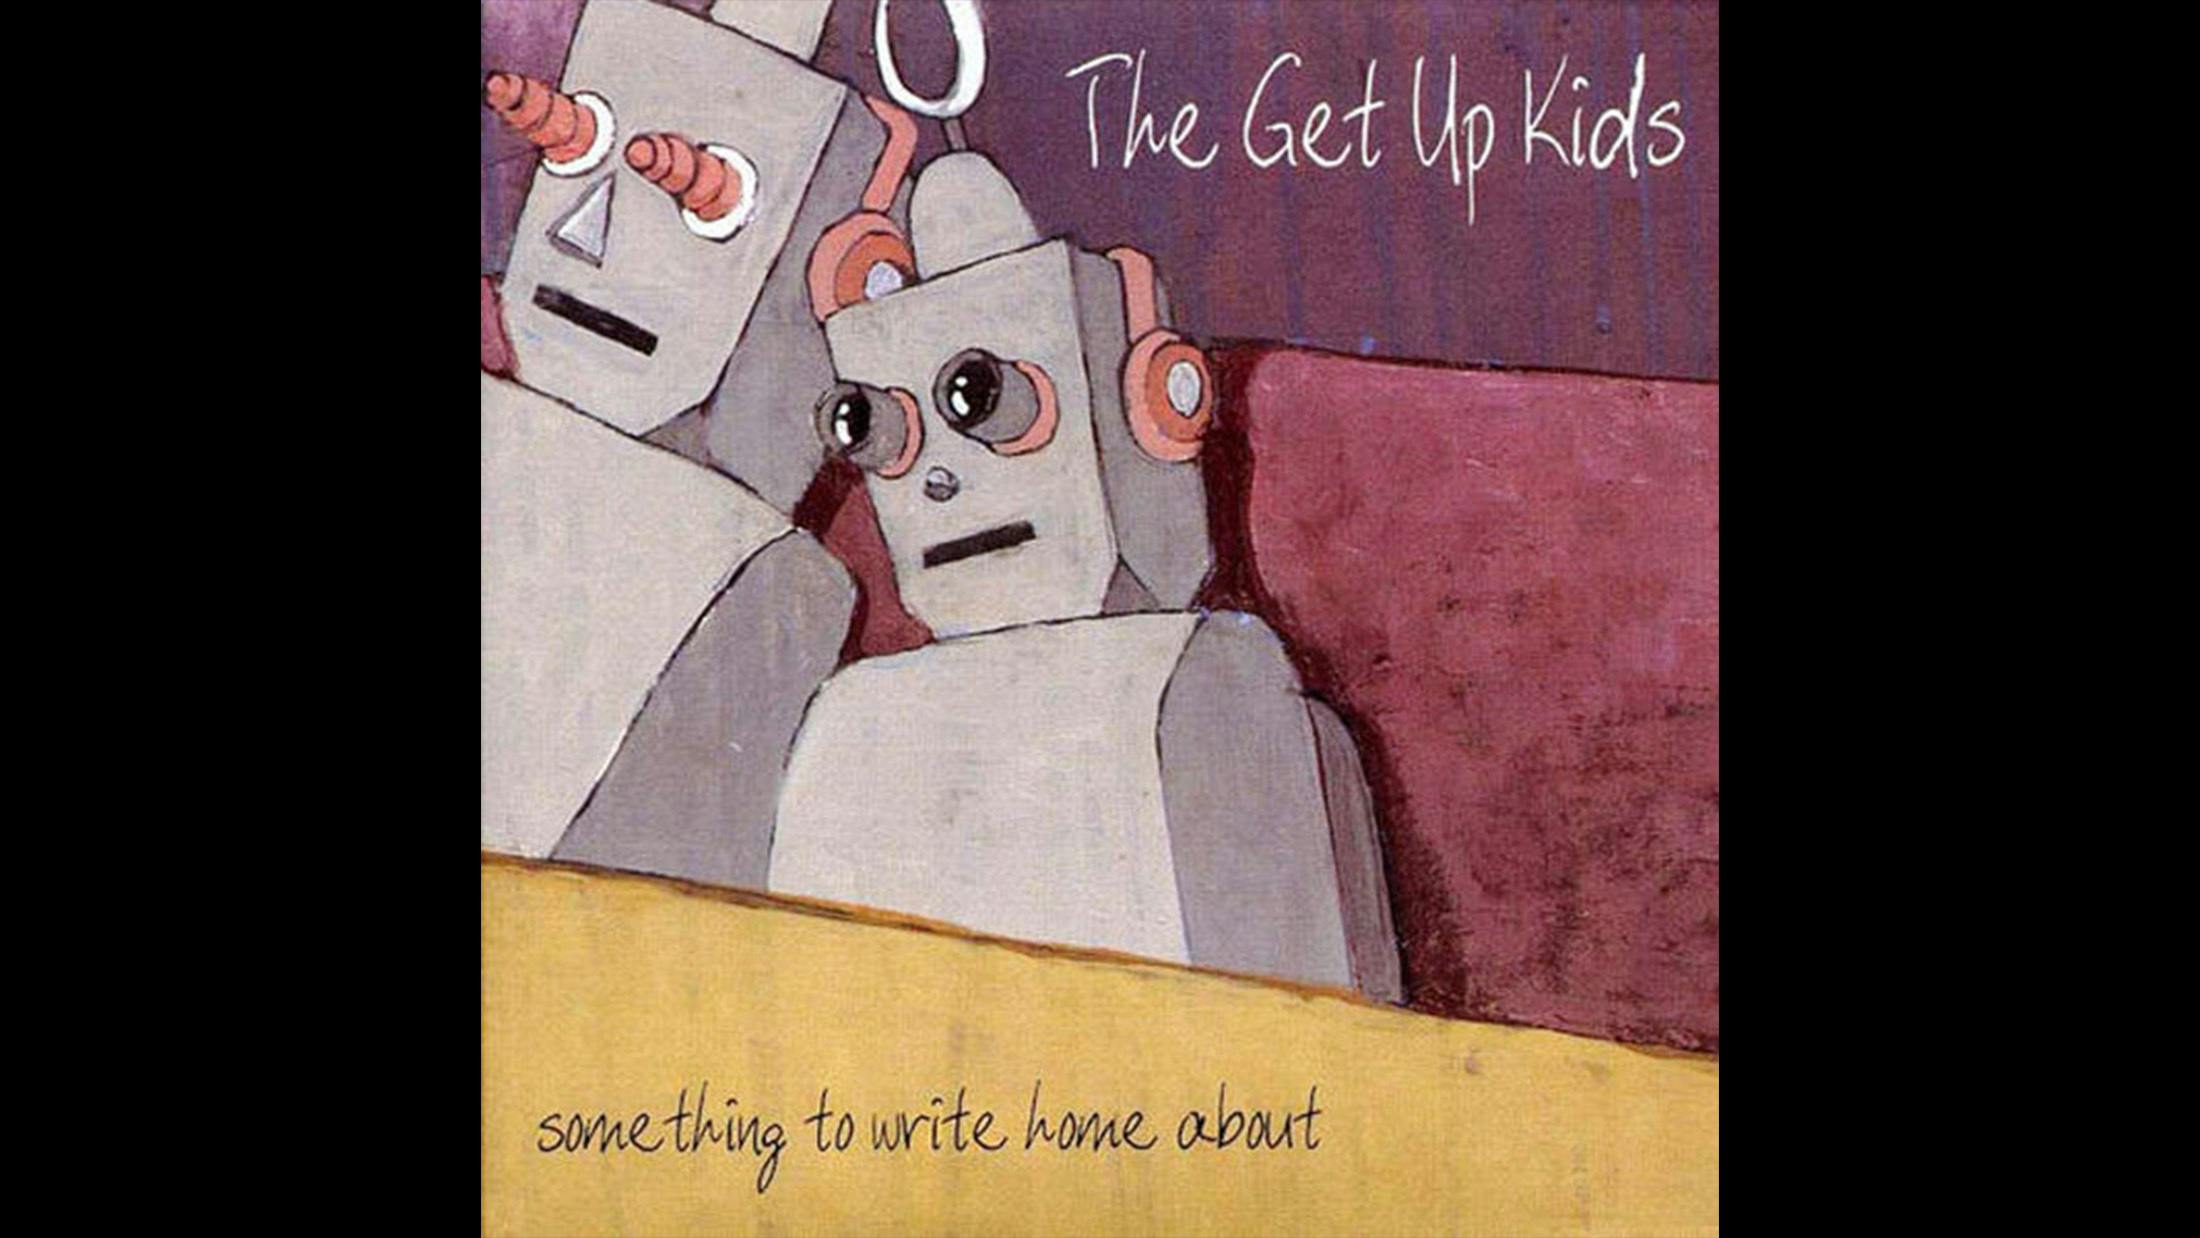 One of the most underrated bands of the modern era, Something To Write Home About is The Get Up Kids’ true masterpiece. A 12-track emotional roller coaster taking in everything from searing heartbreak to wild, all-consuming bitterness, we dare you to put this album on and not sing, cry and dance – sometimes all at once.